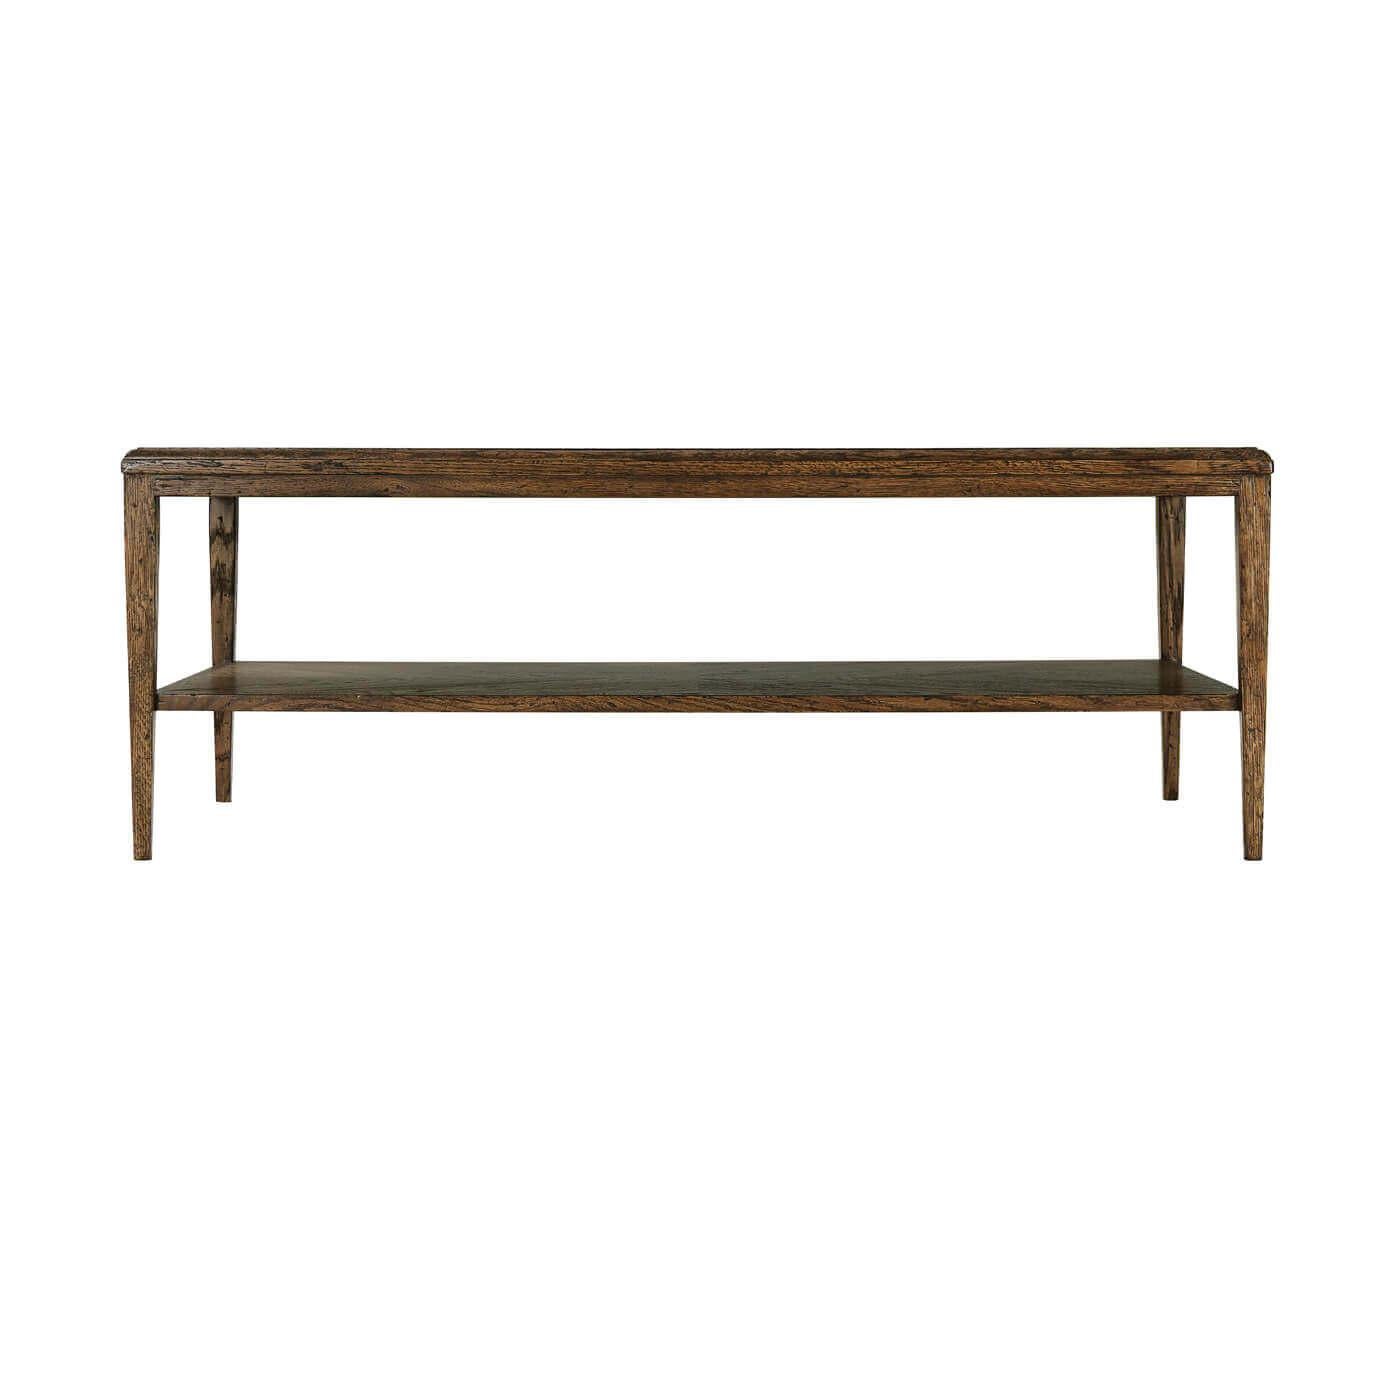 Modern Oak Coffee Table - Dark Finish In New Condition For Sale In Westwood, NJ